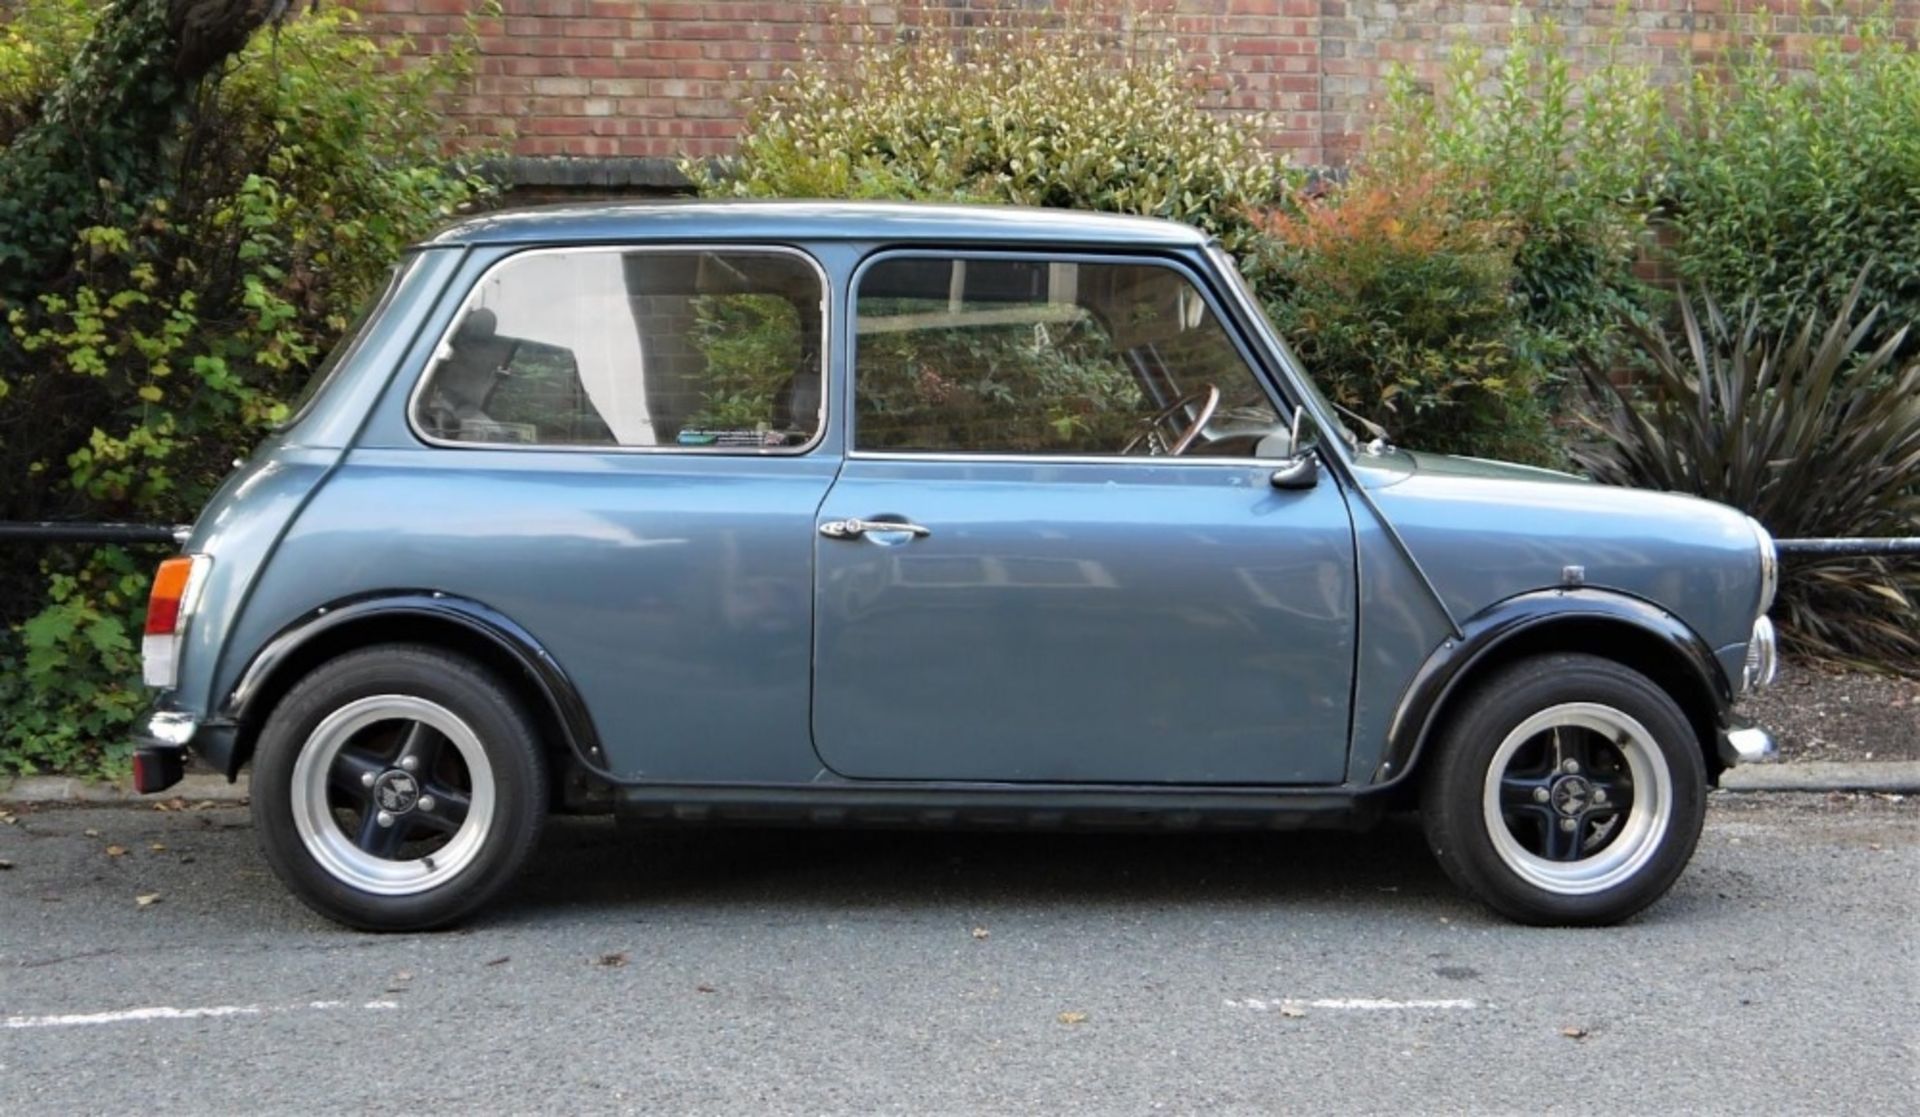 1991 ROVER MINI NEON Registration Number: J774 NWD Recorded Mileage: 58,000 miles Chassis Number: - Image 14 of 24